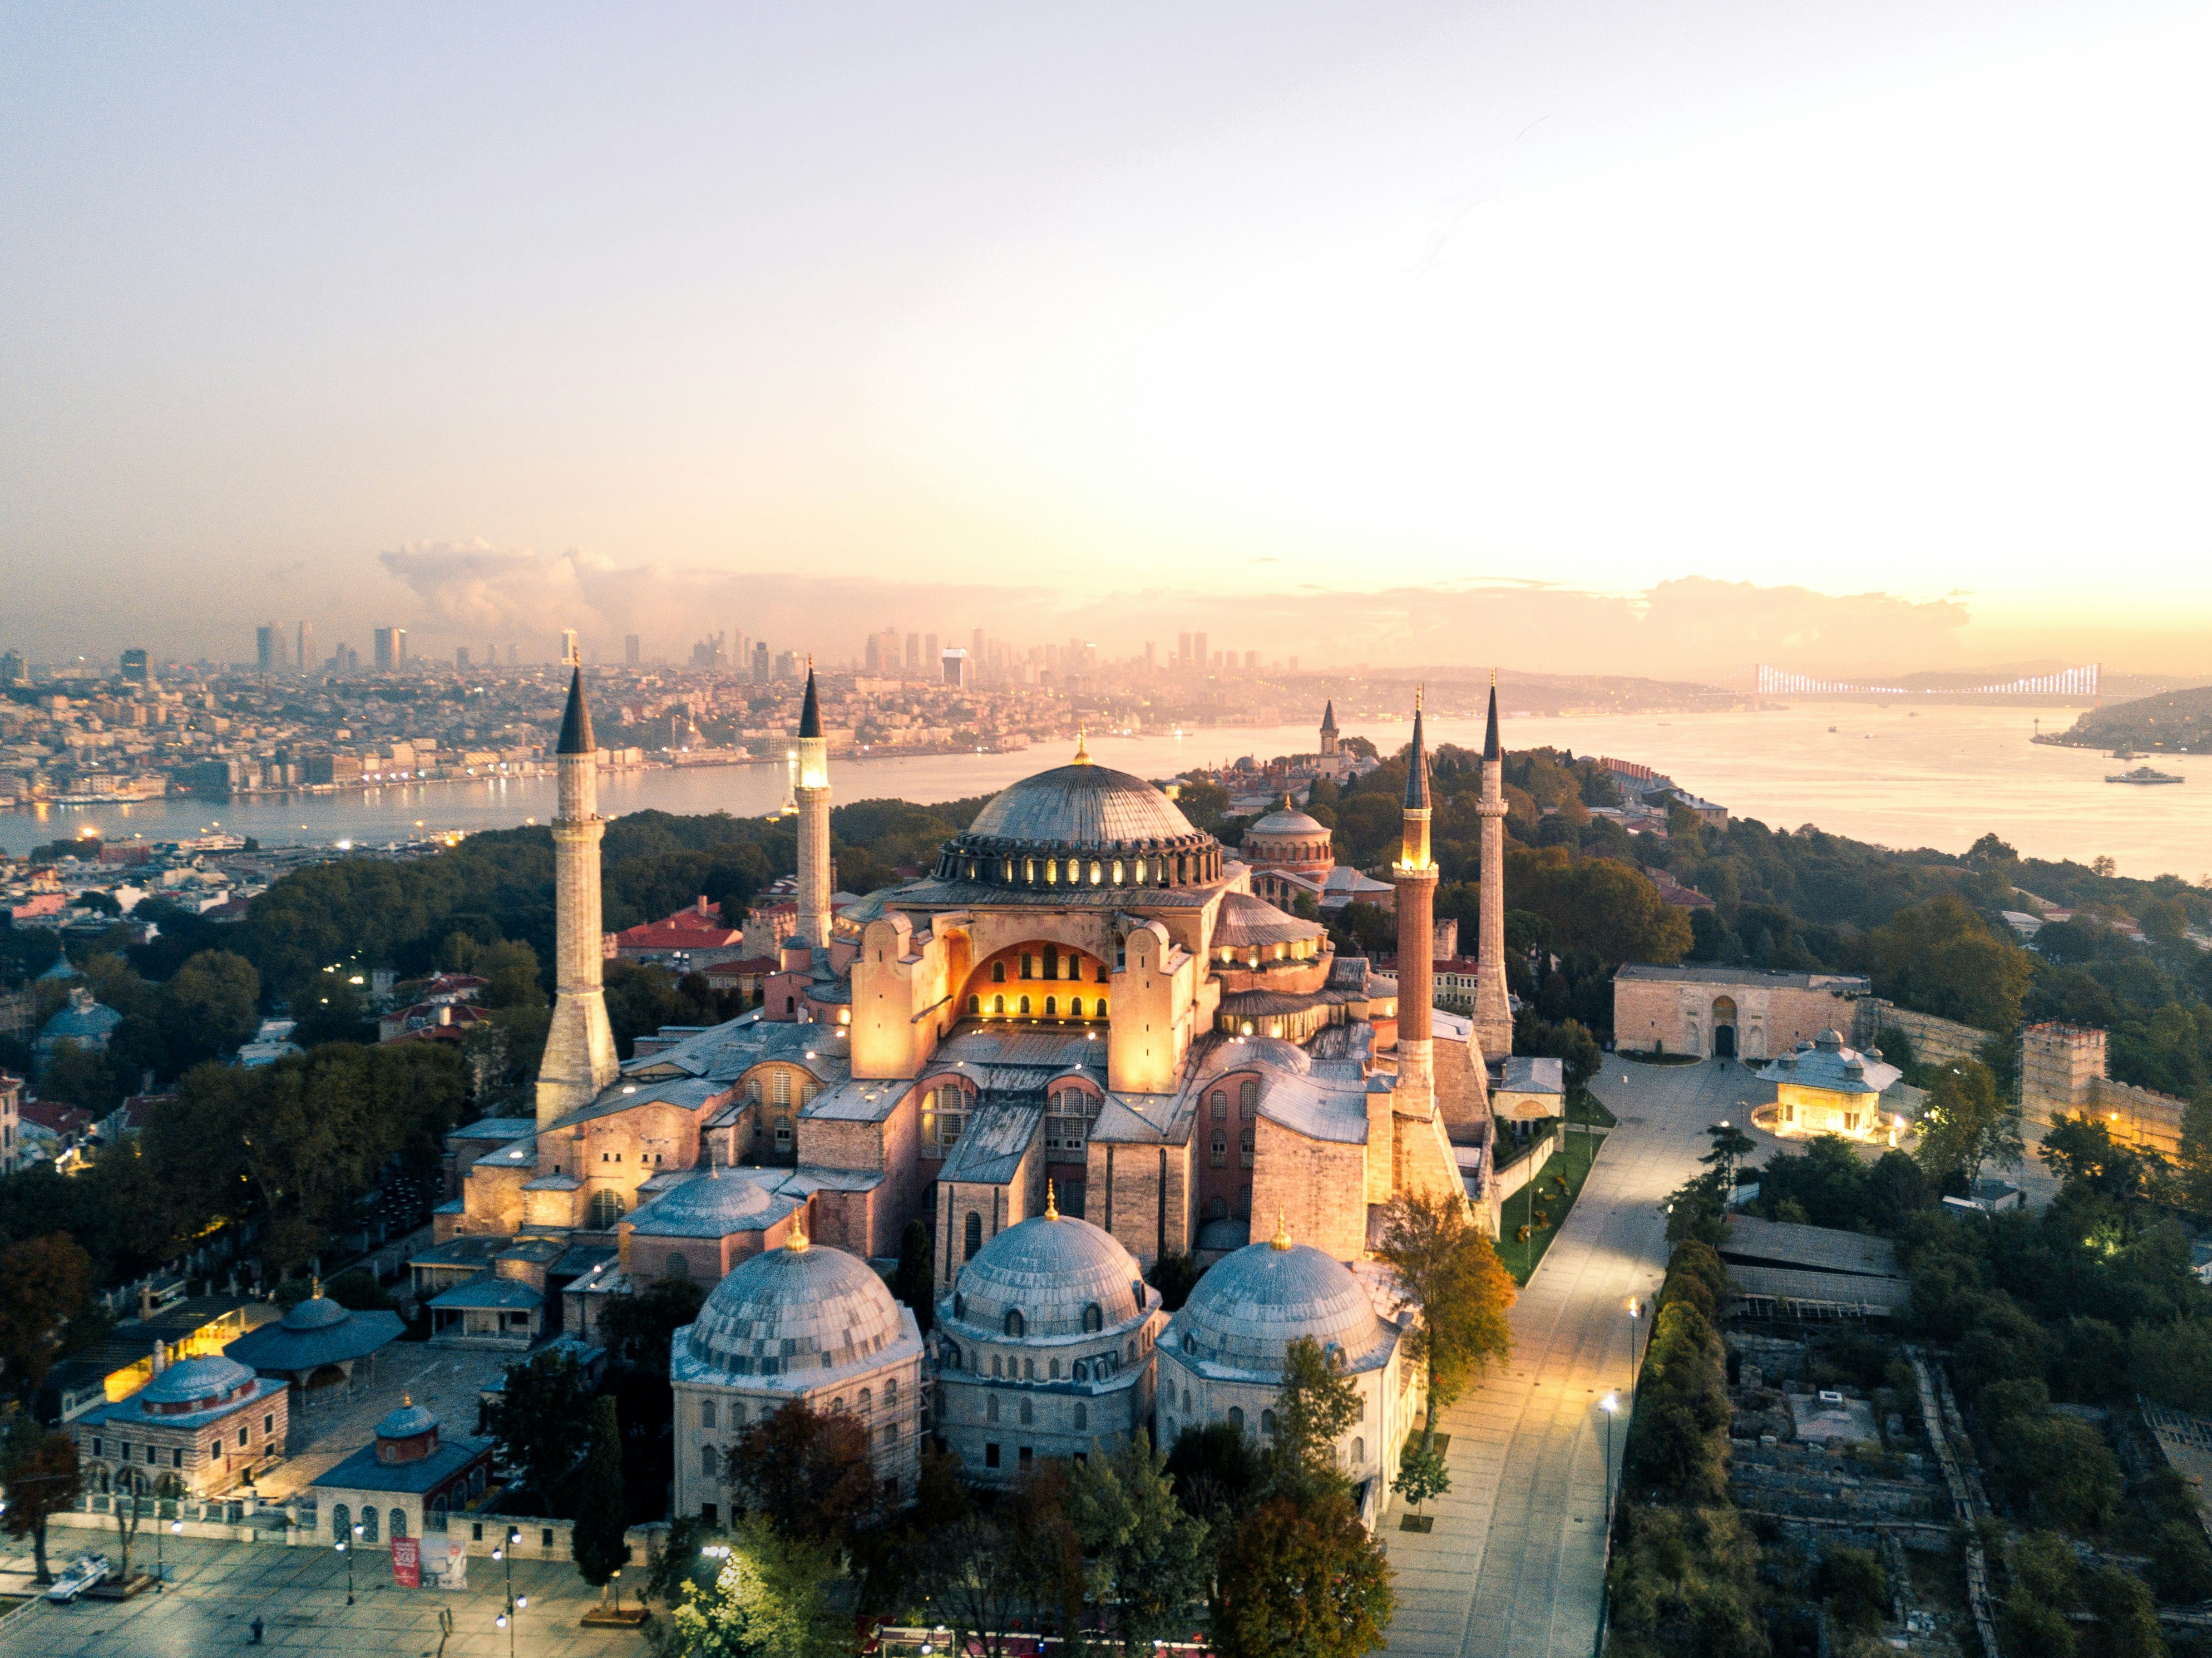 An aerial view of the Hagia Sophia mosque in Istanbul; the photo is taken at dusk, and lights are beginning to illuminate the city.